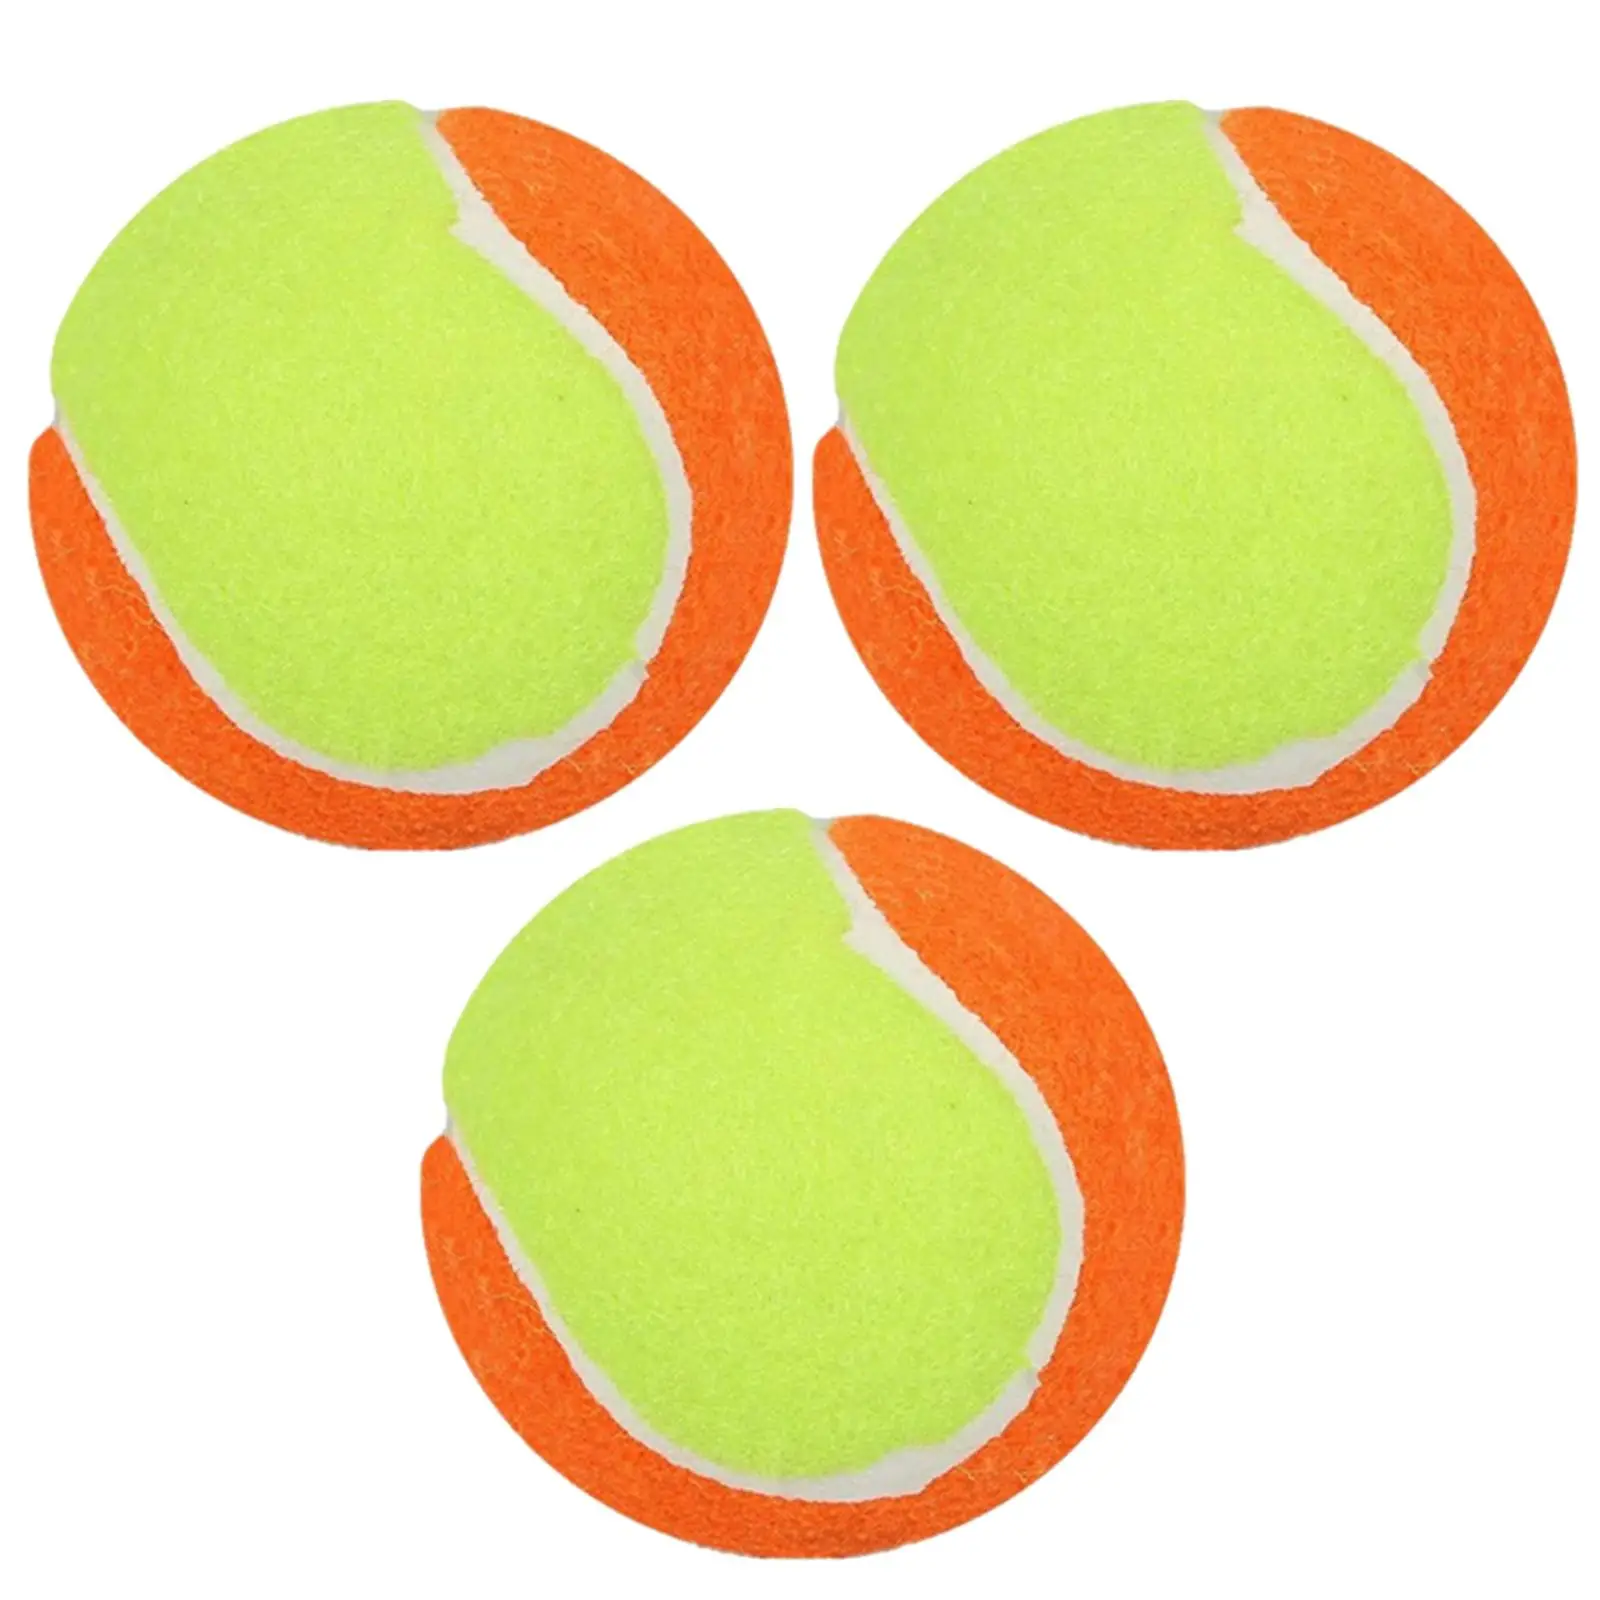 Set of 3 Ball Easily Track pinwheel Dog Toy Rubber for Indoor